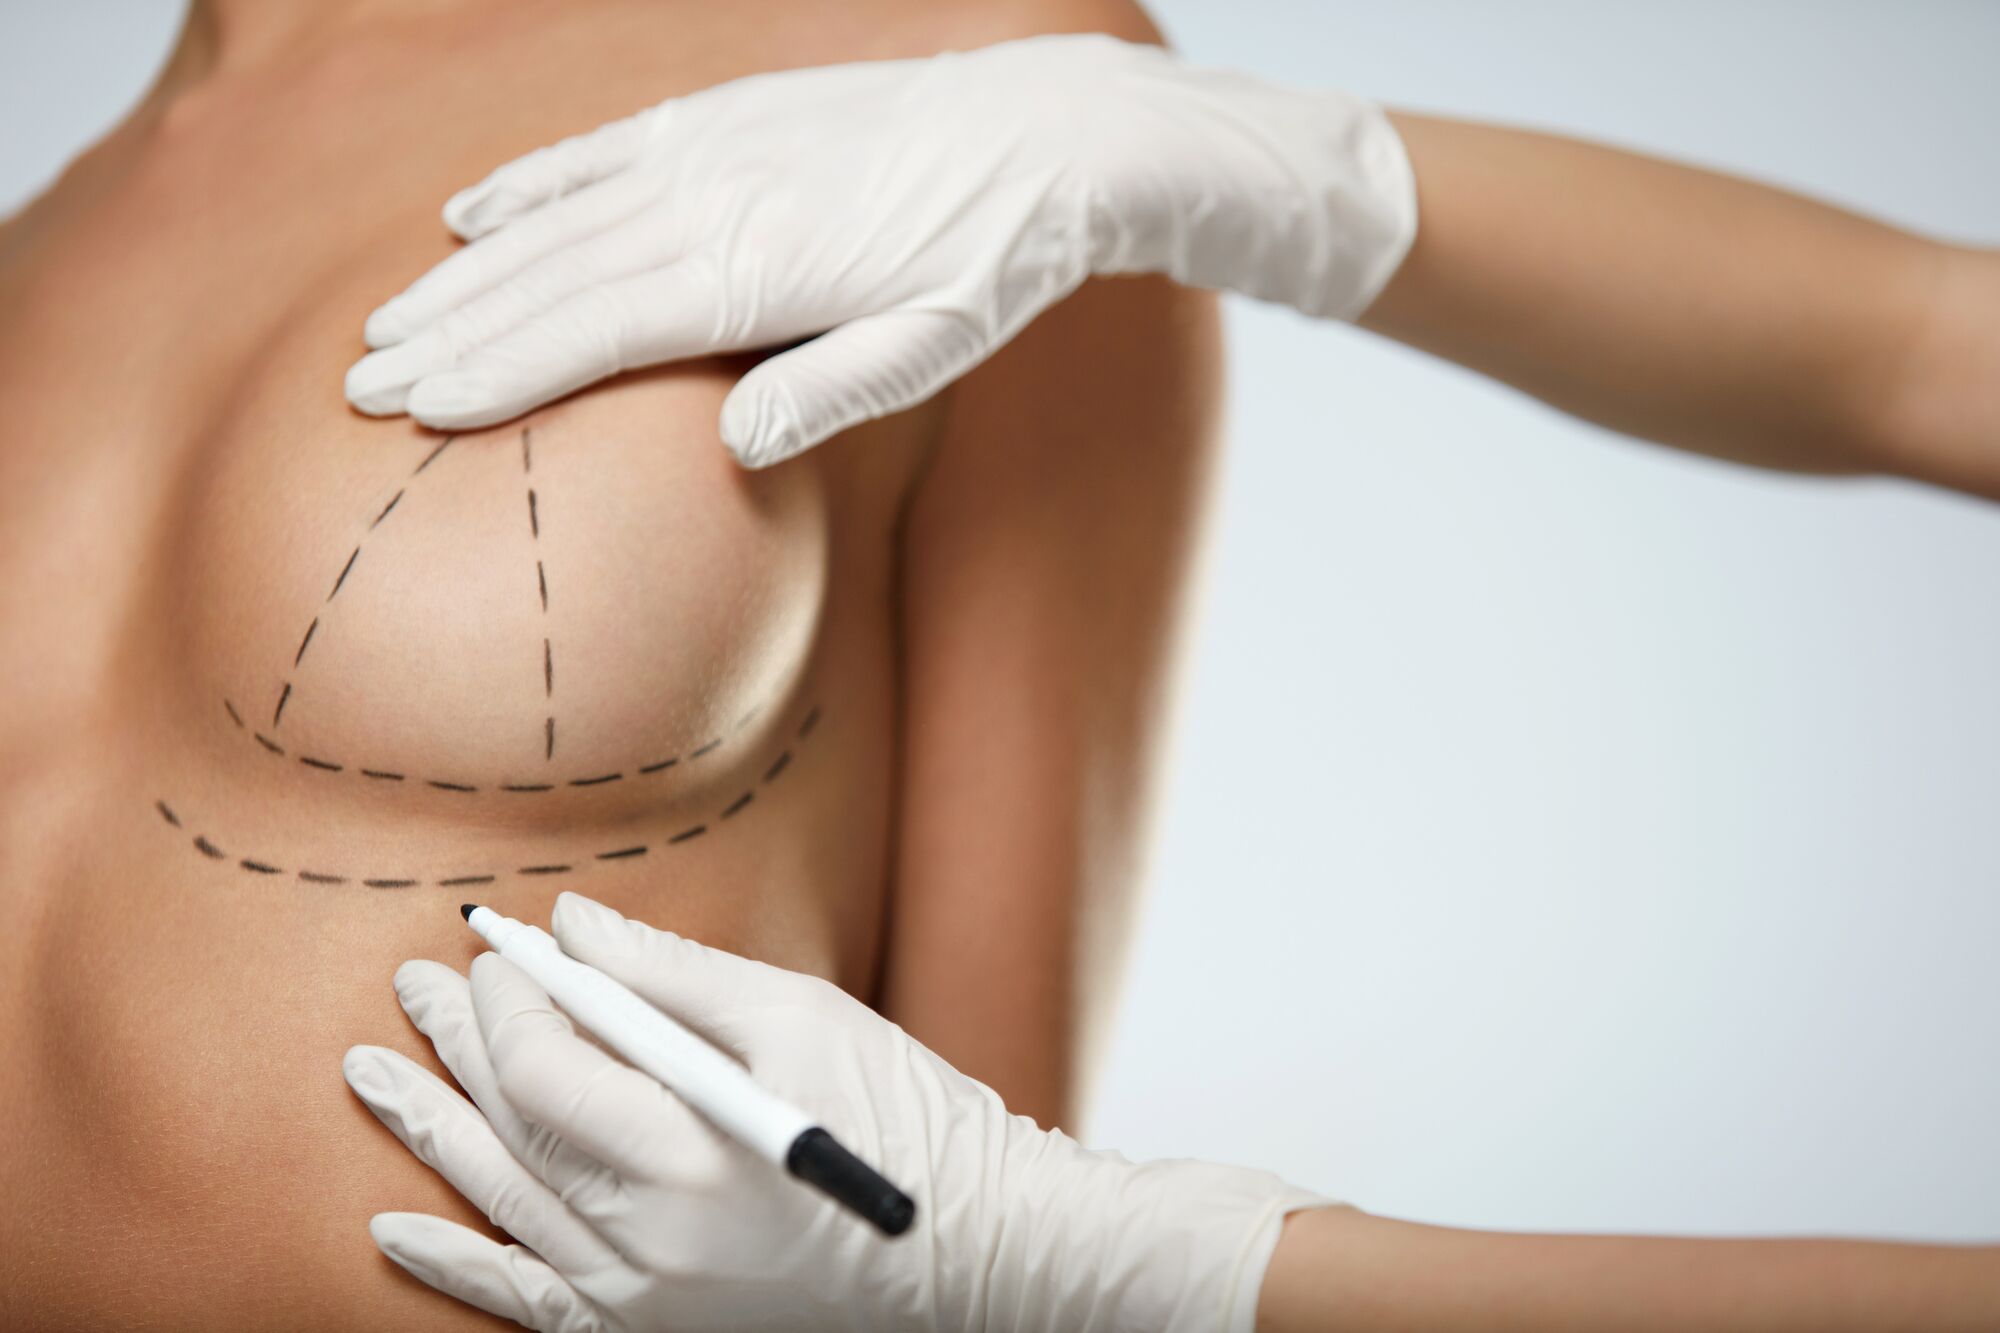 Details About Breast Lift (Mastopexy) Surgery